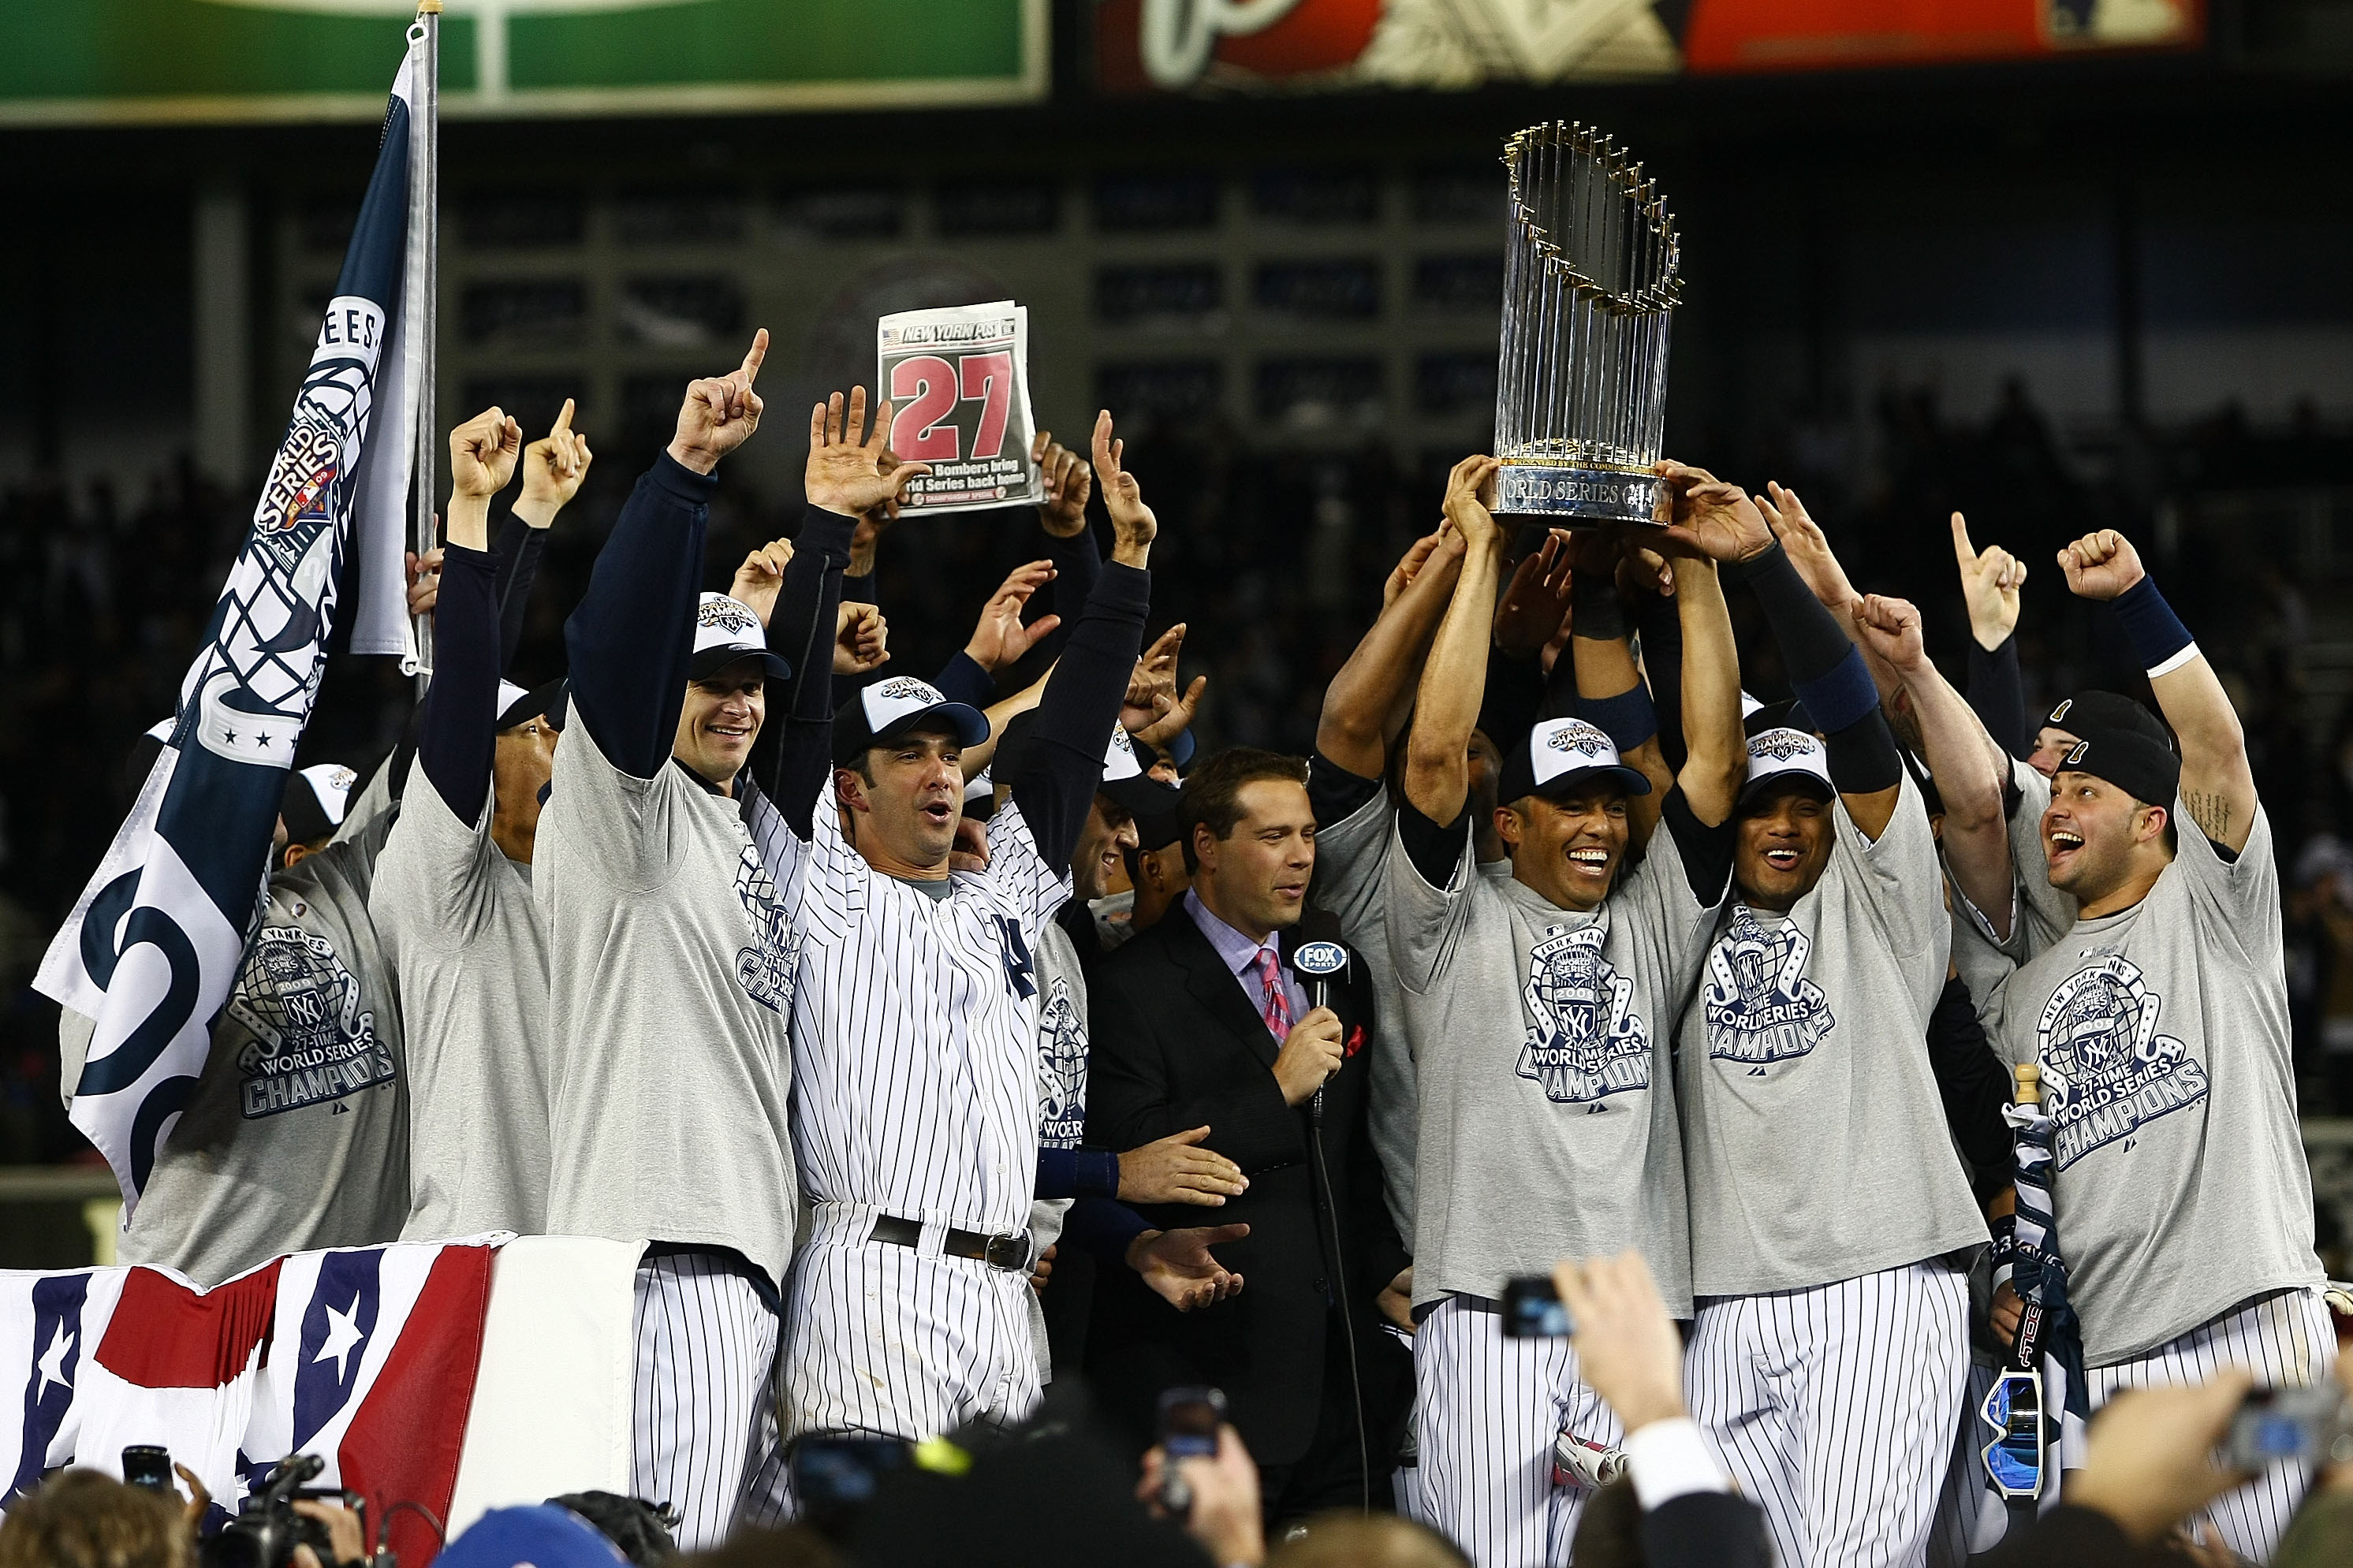 Indisputable proof that Yankees will win World Series in 2024